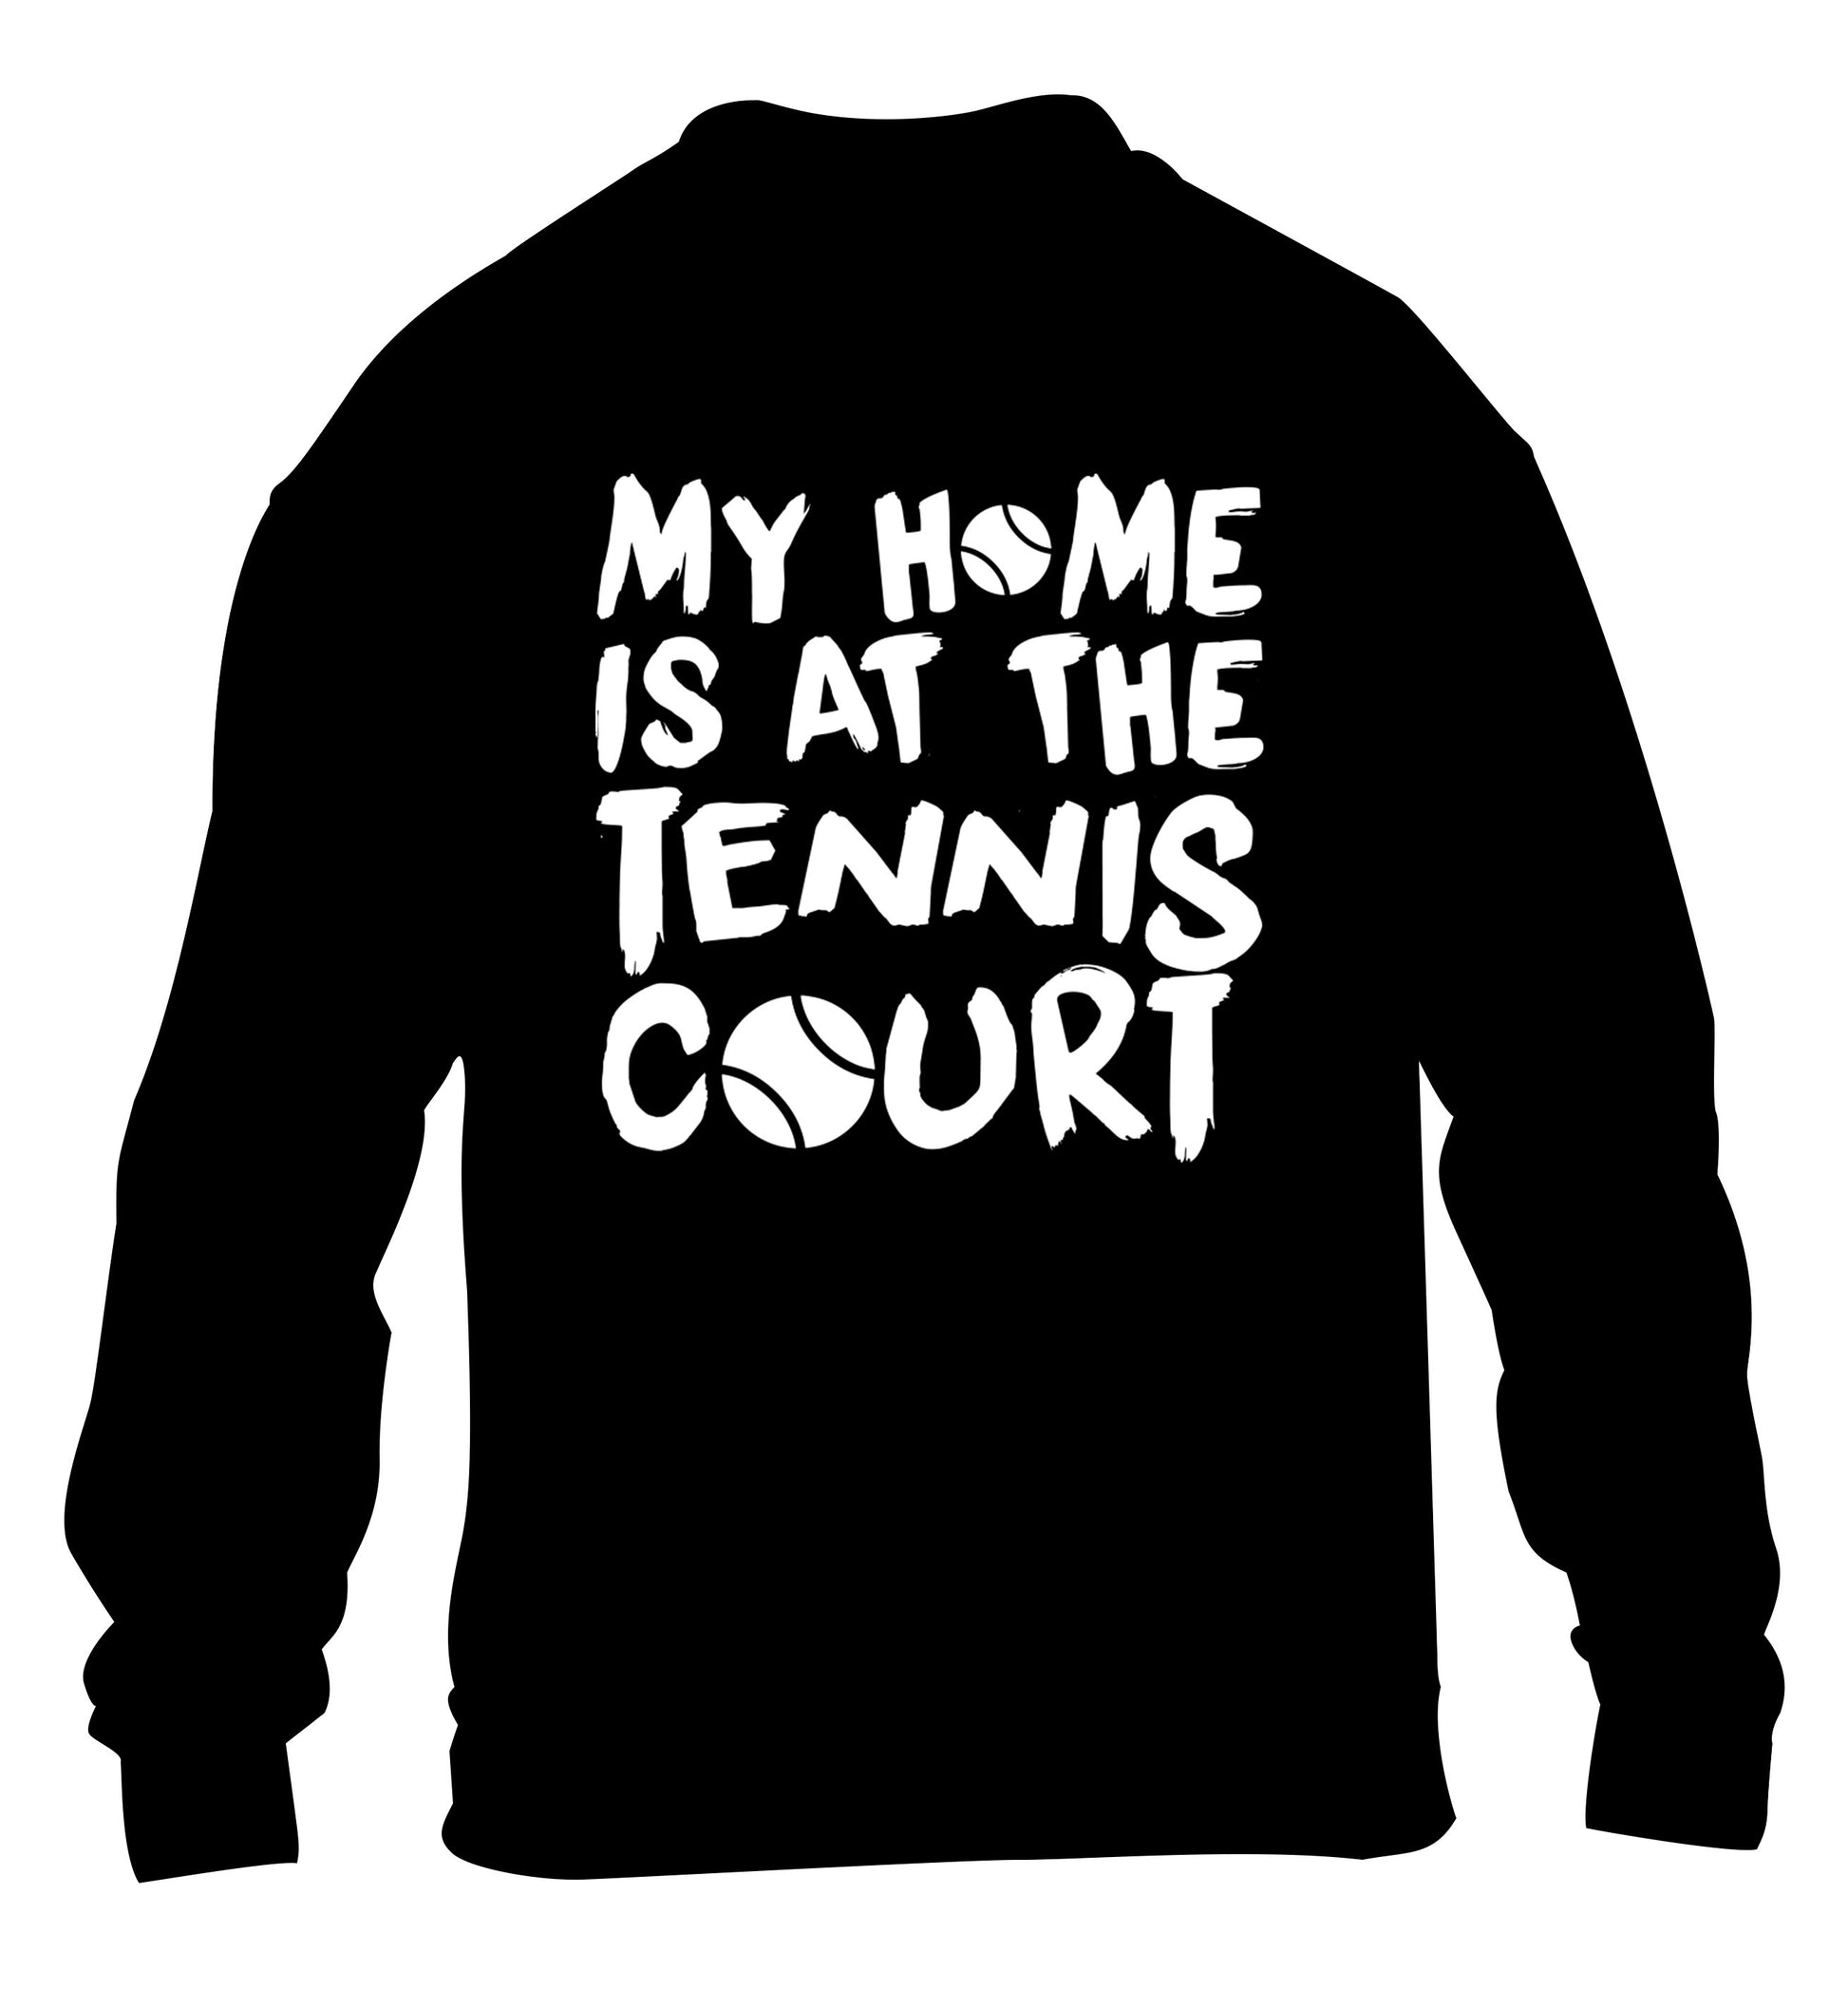 My home is at the tennis court children's black sweater 12-14 Years